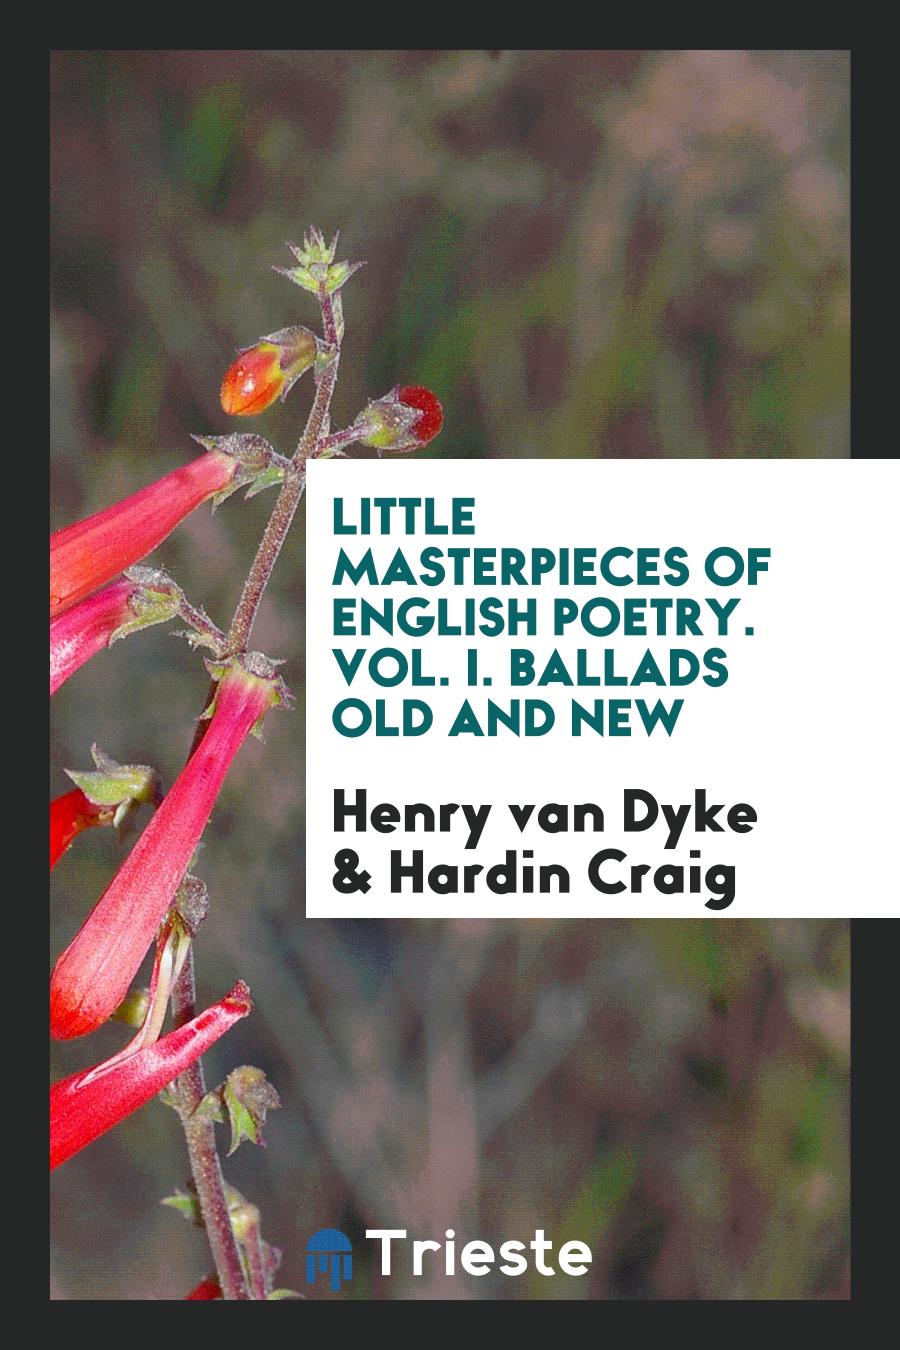 Little Masterpieces of English Poetry. Vol. I. Ballads Old and New